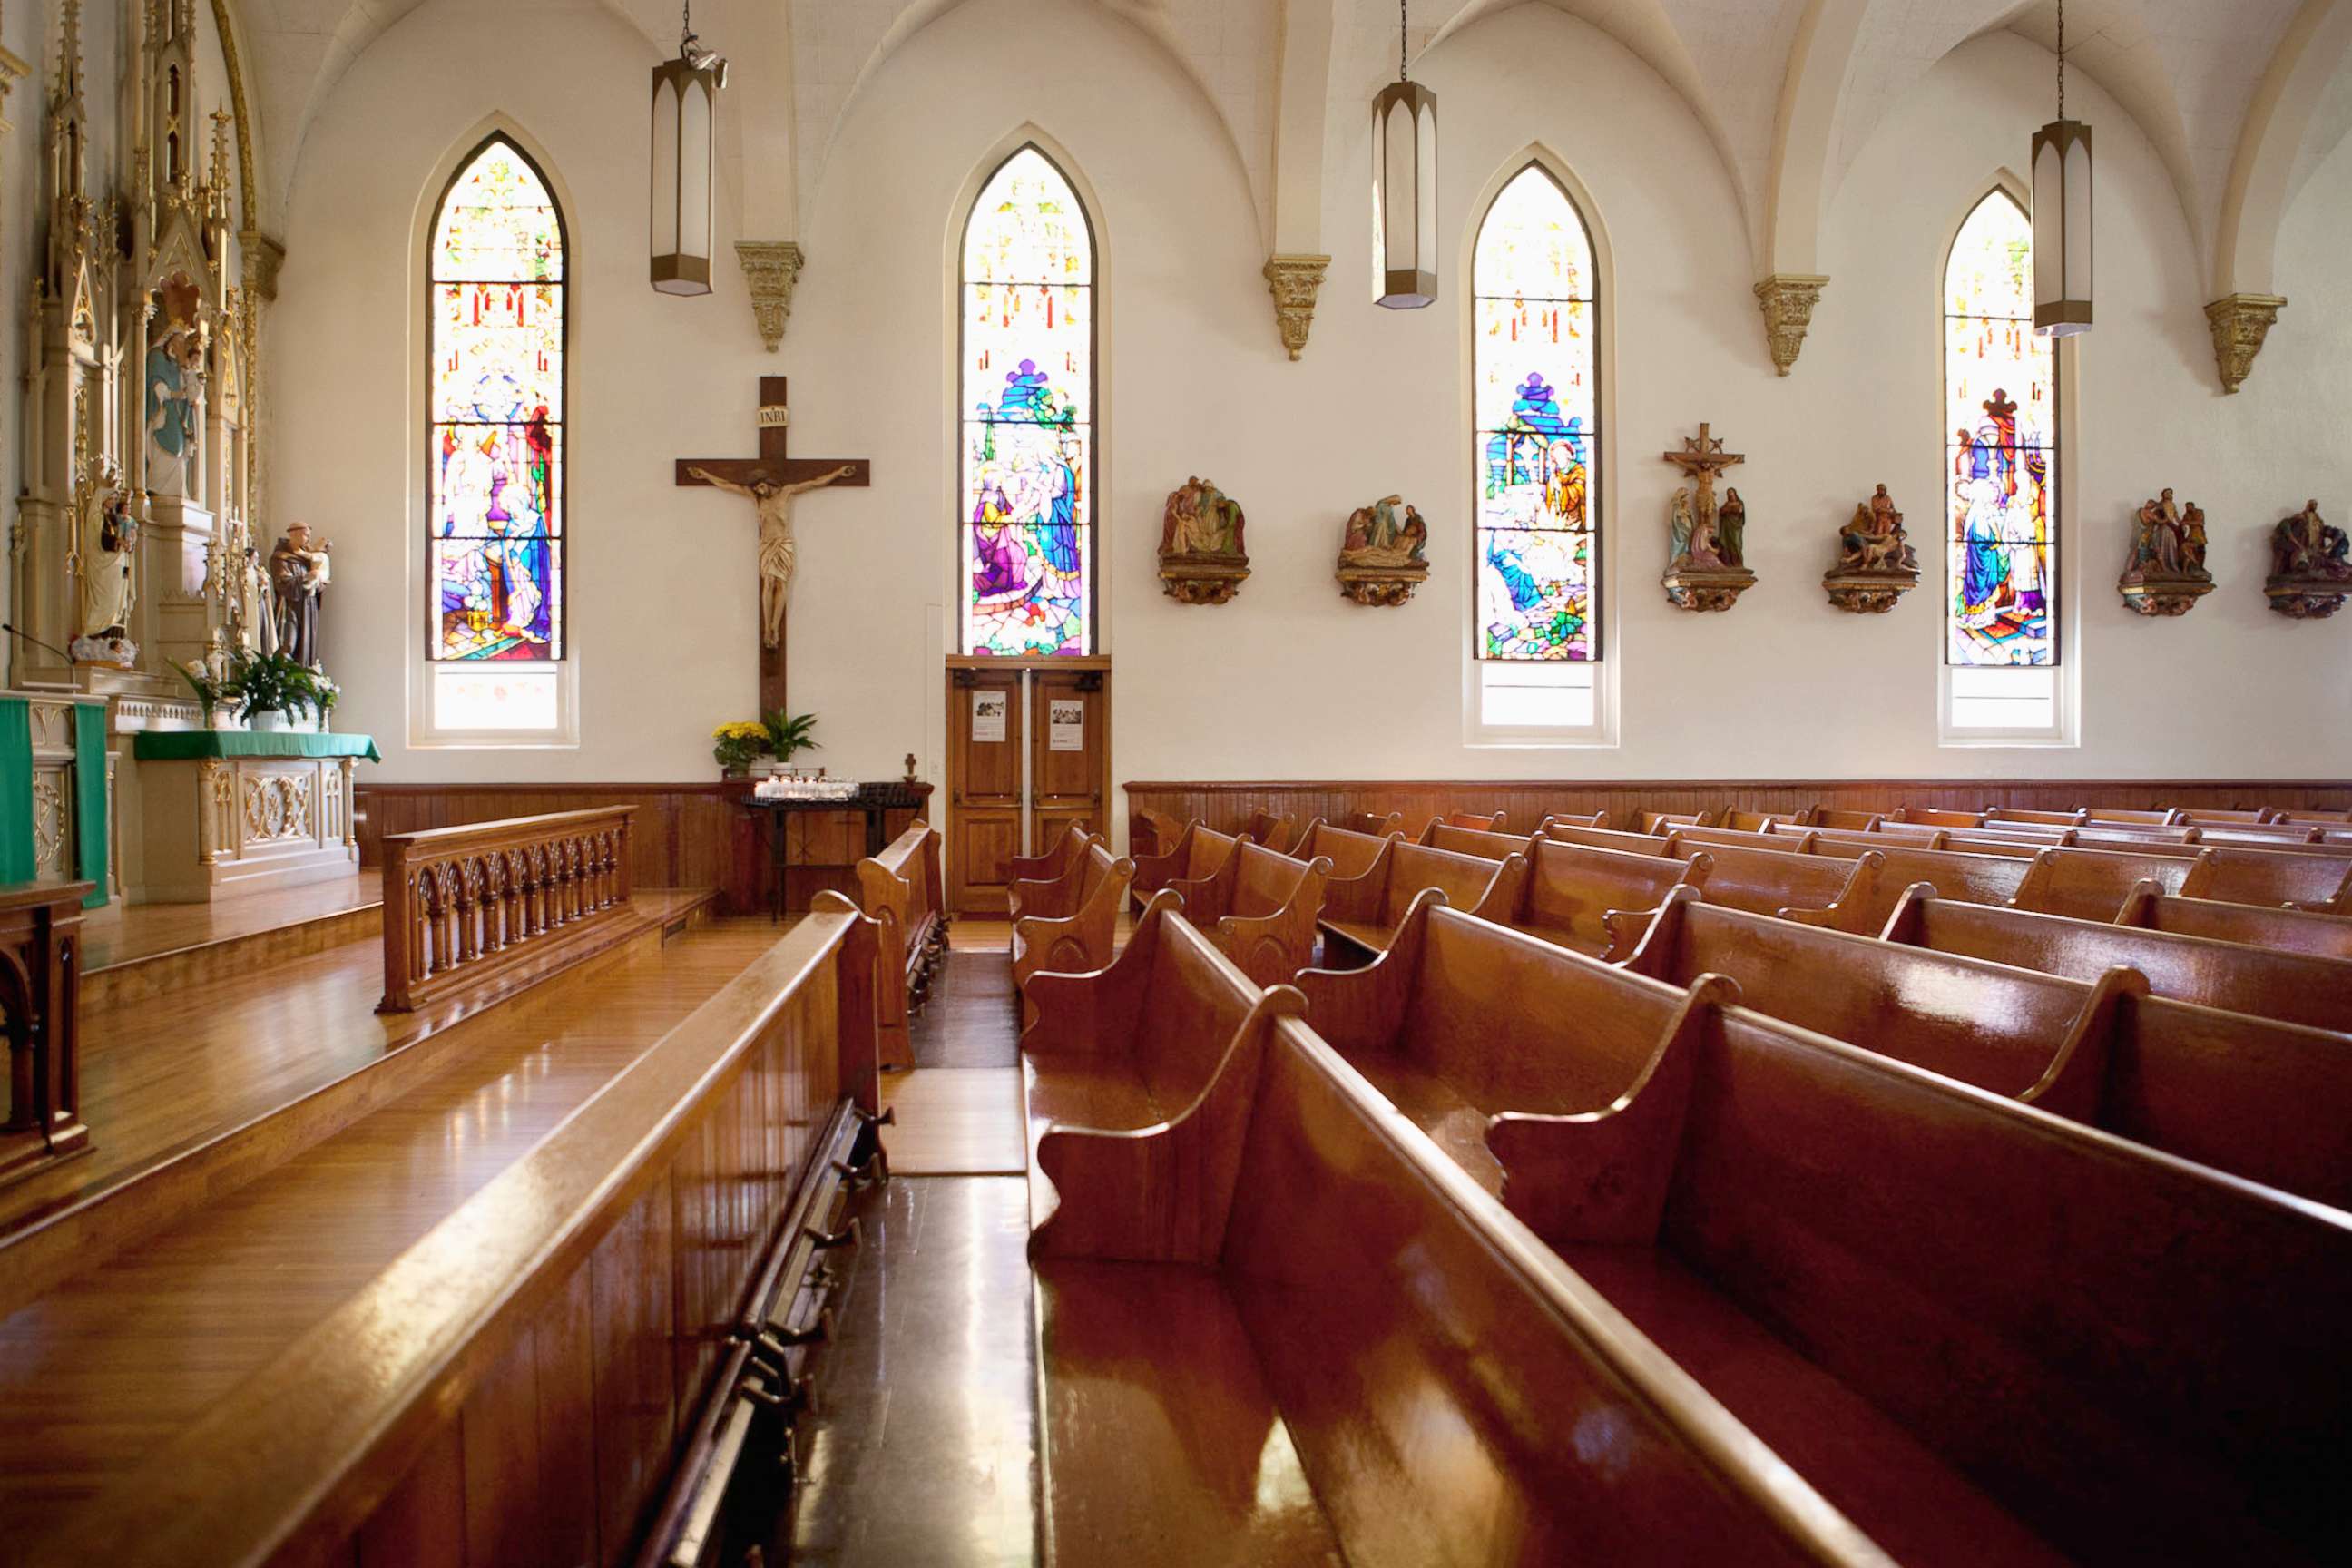 PHOTO: An undated stock photo of pews and stained glass windows in a church.